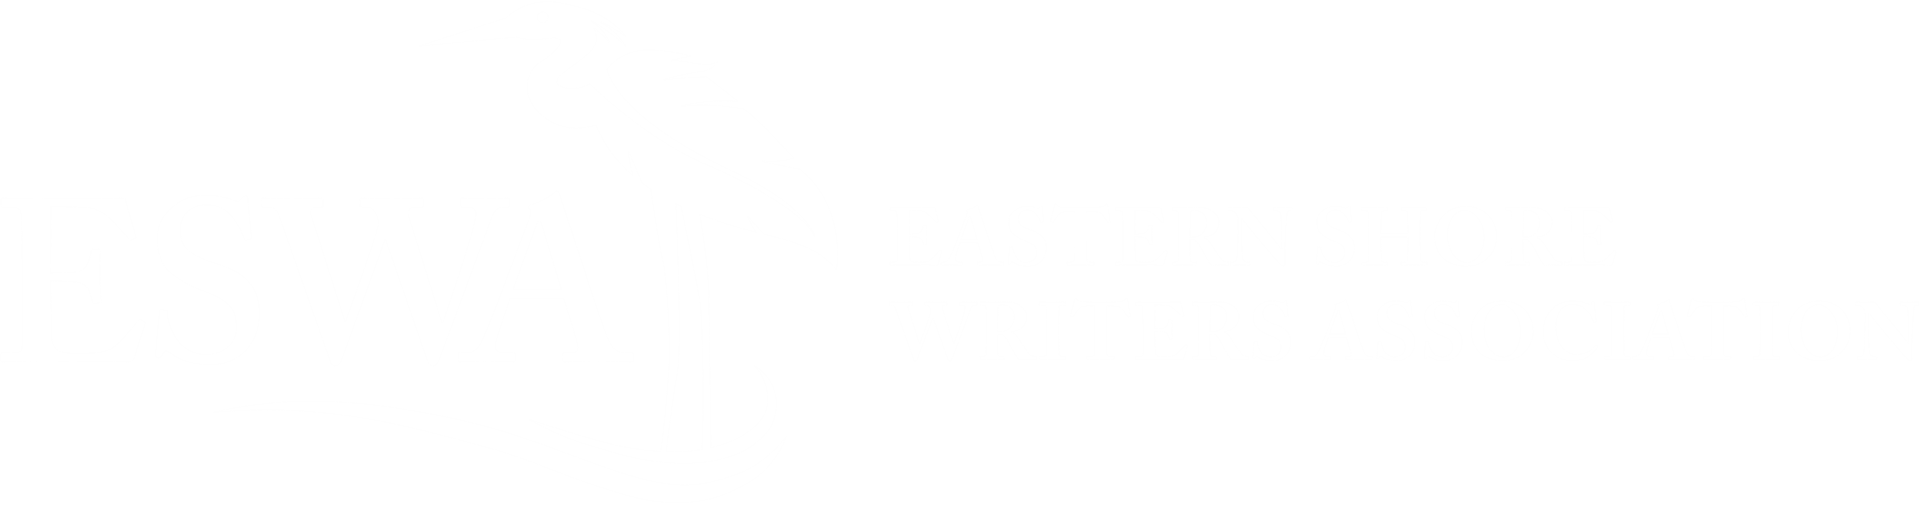 https://www.easternshorewriters.org/resources/Pictures/NewSite_0722/ESWAlogowhite_withtext.png